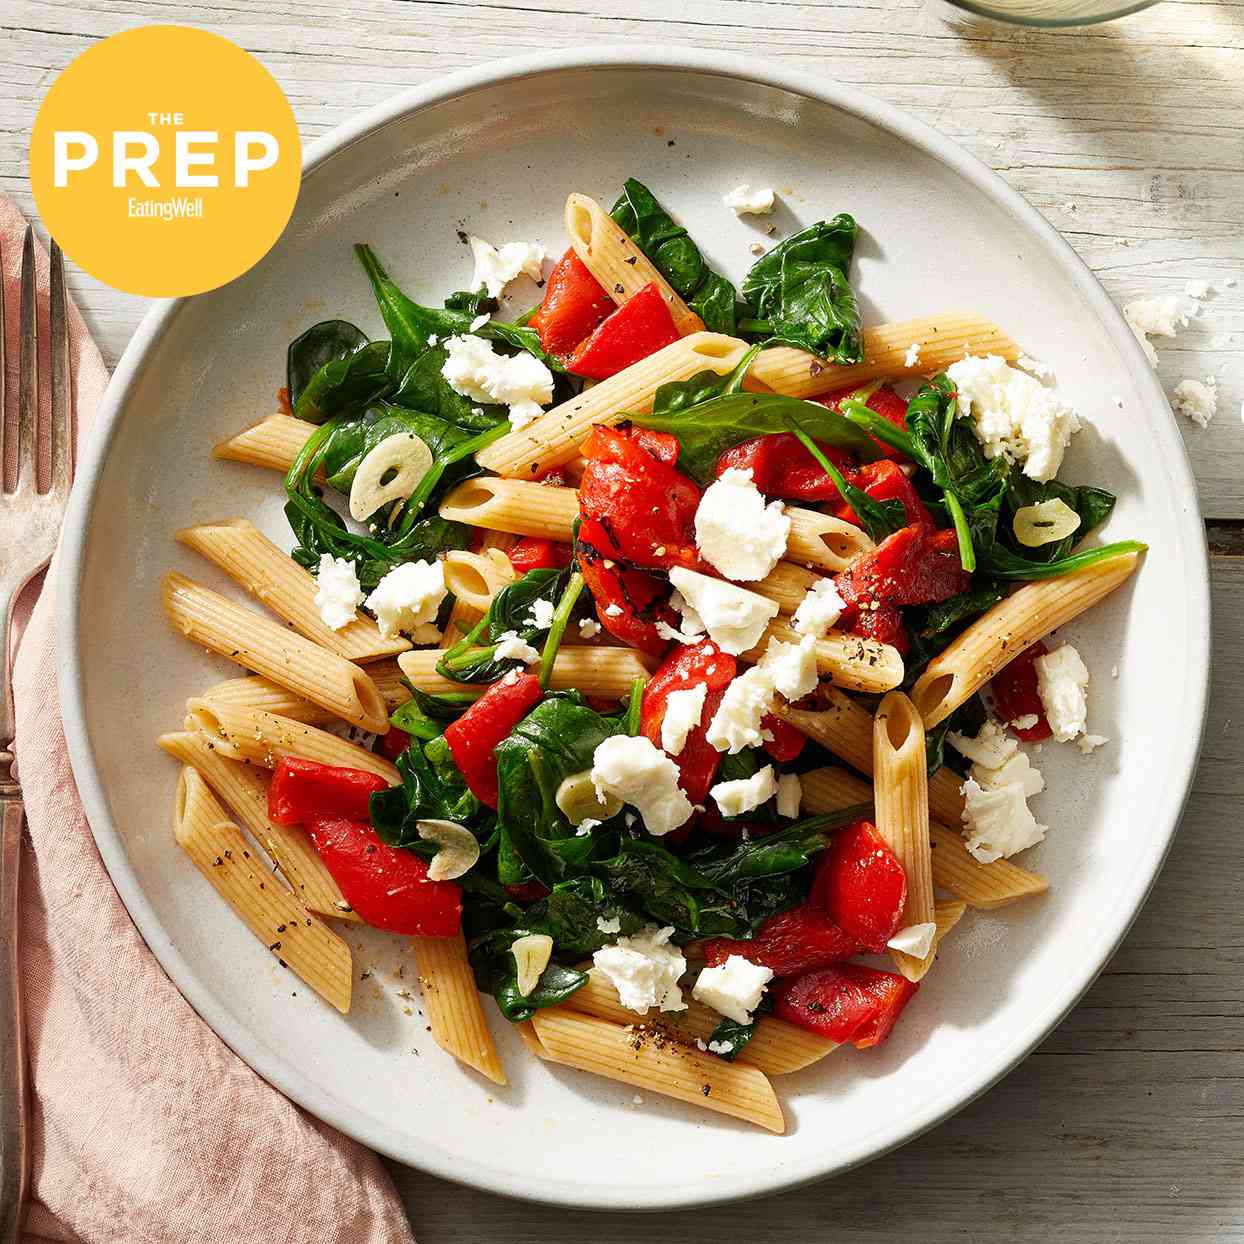 Roasted Red Pepper Spinach Feta Penne with EatingWell's "ThePrep" logo